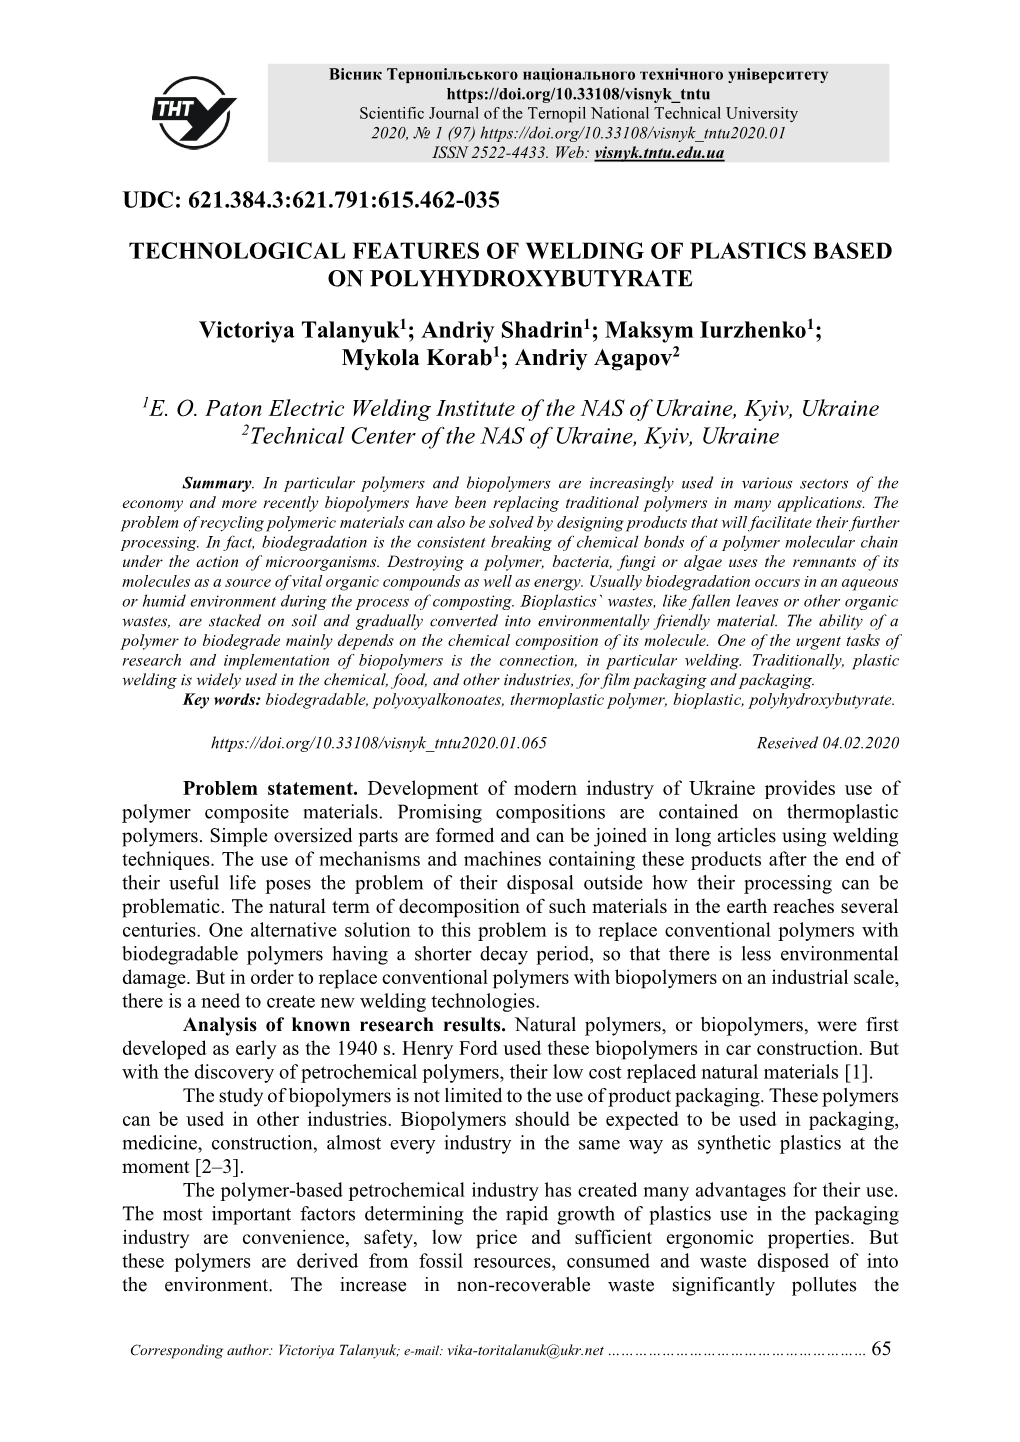 Technological Features of Welding of Plastics Based on Polyhydroxybutyrate